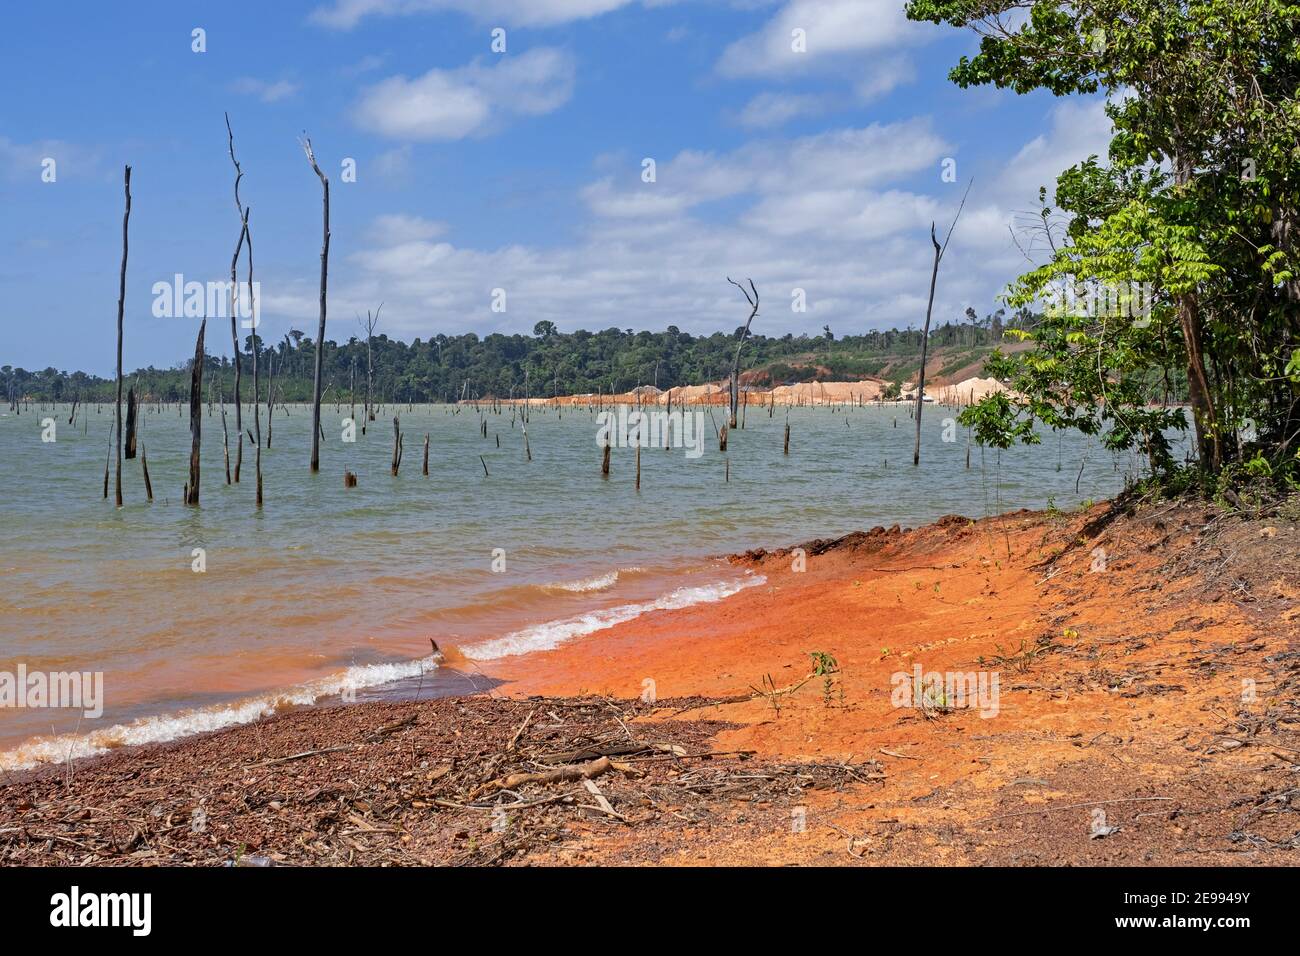 Dead trees in the Brokopondo reservoir / Brokopondostuwmeer, artificial lake created by constructing the Afobaka Dam across the Suriname River Stock Photo